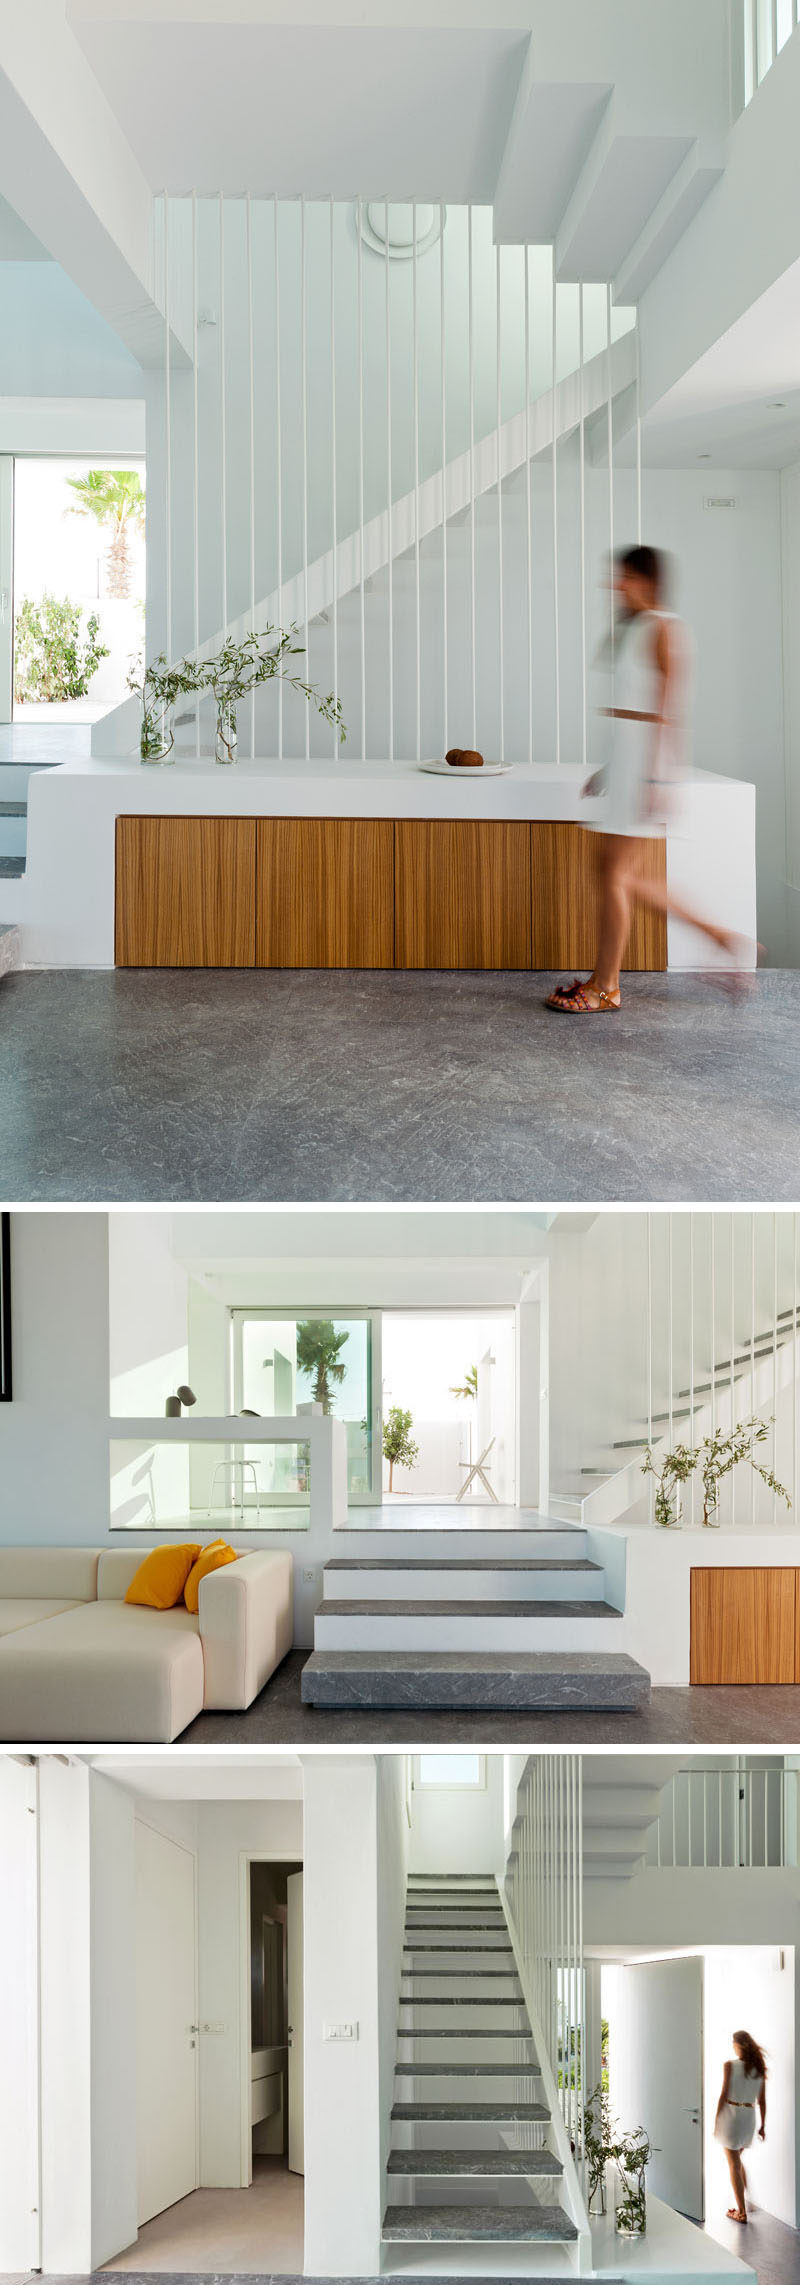 In this modern house interior, a few small steps lead to a landing with a desk as well as access to a bedroom and a bathroom. Gortynis grey marble has been used for flooring in this area and on the stair treads. #ModernStairs #GreyStairTreads #InteriorDesign #ModernInterior